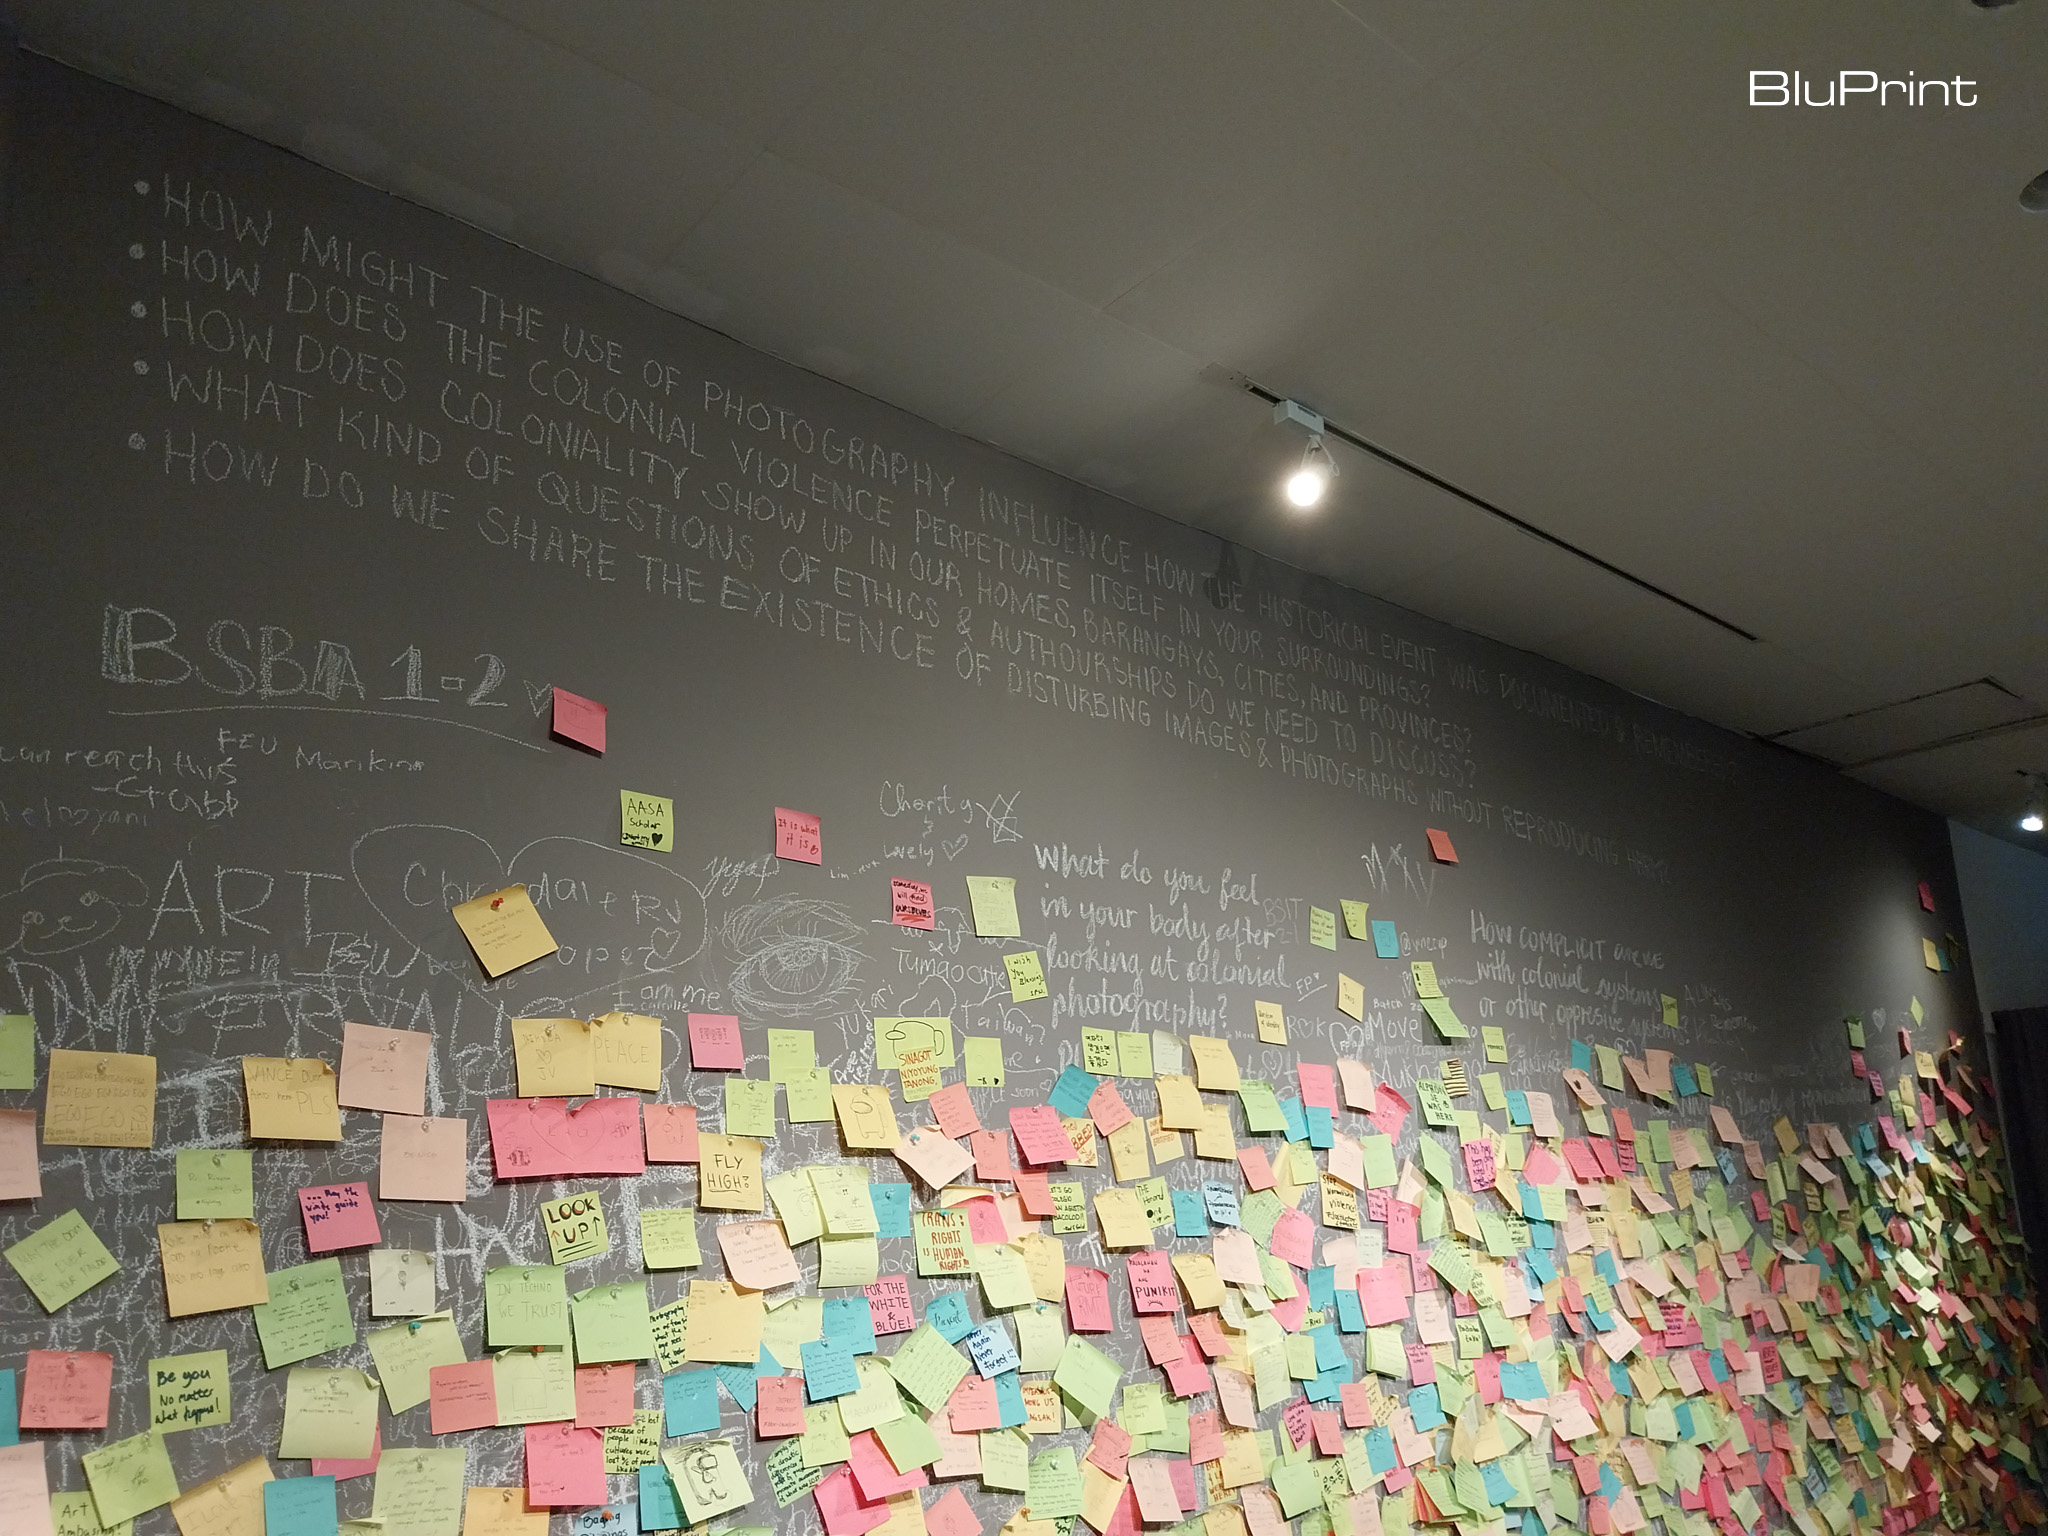 Wall full of Post-Its in the "Snare for Birds" exhibit at the Ateneo Art Gallery. Photo by Patricia F. Yap.